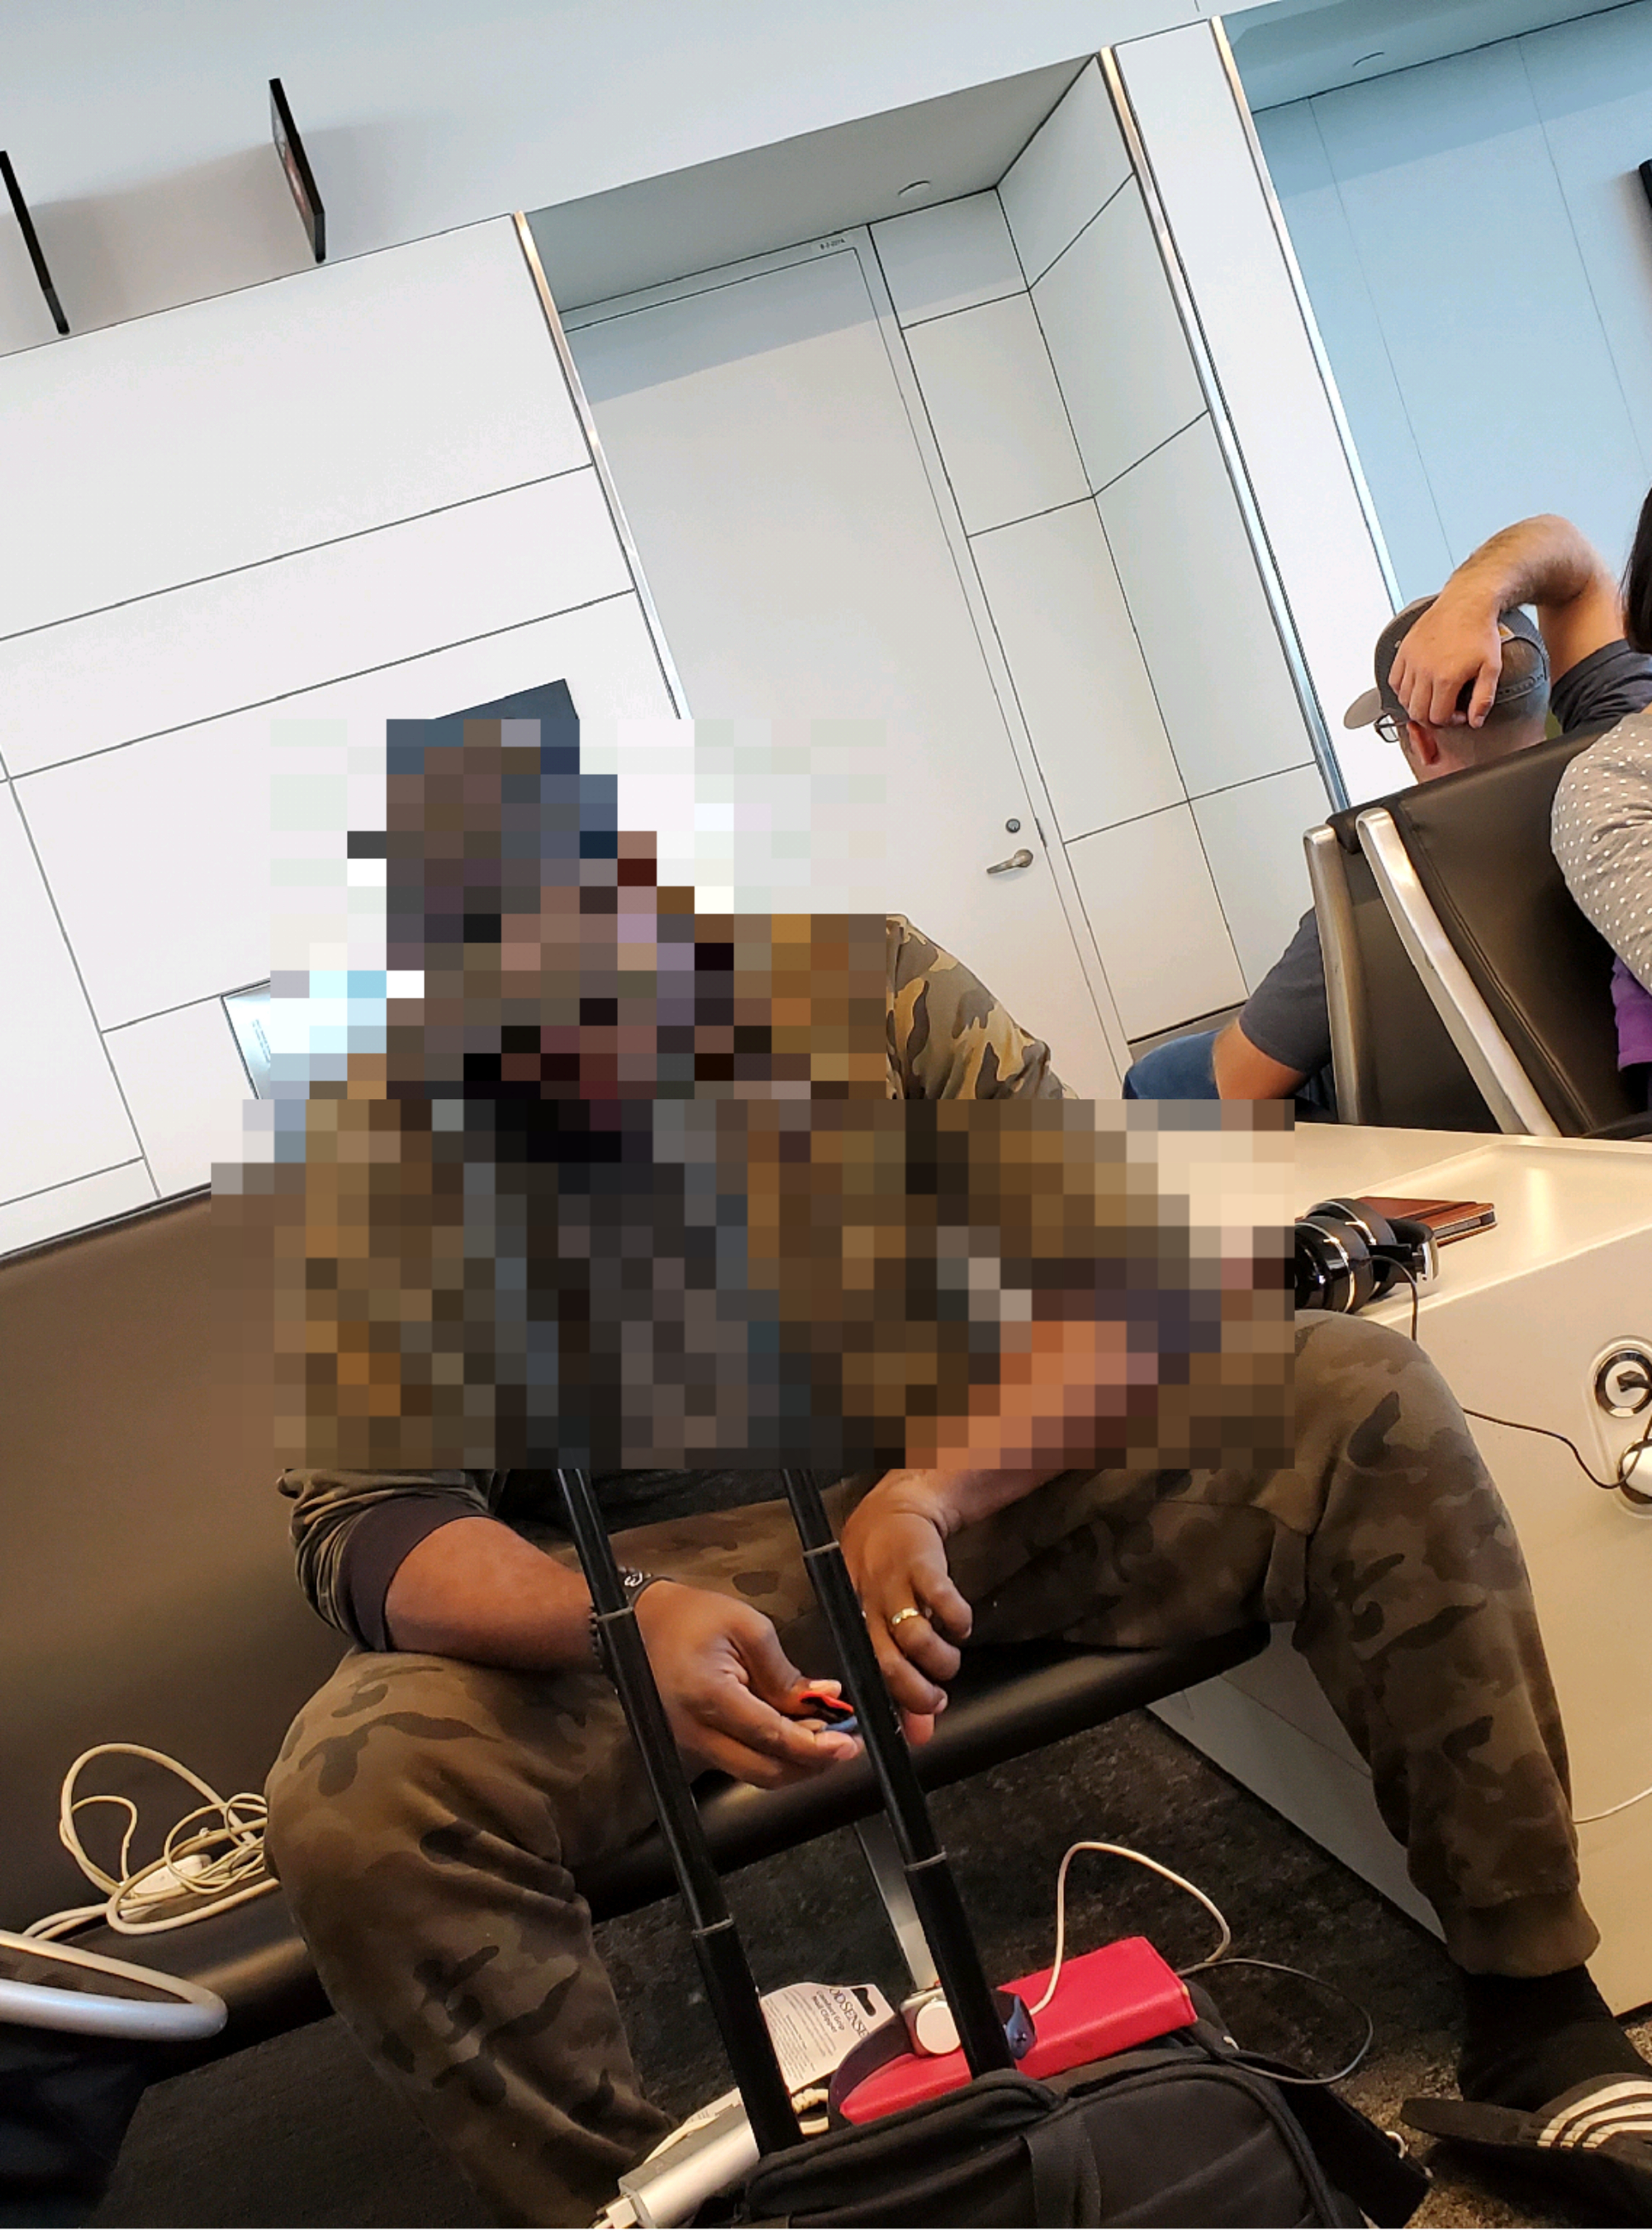 Person with a pixelated face, sitting in an airport terminal clipping his fingernails